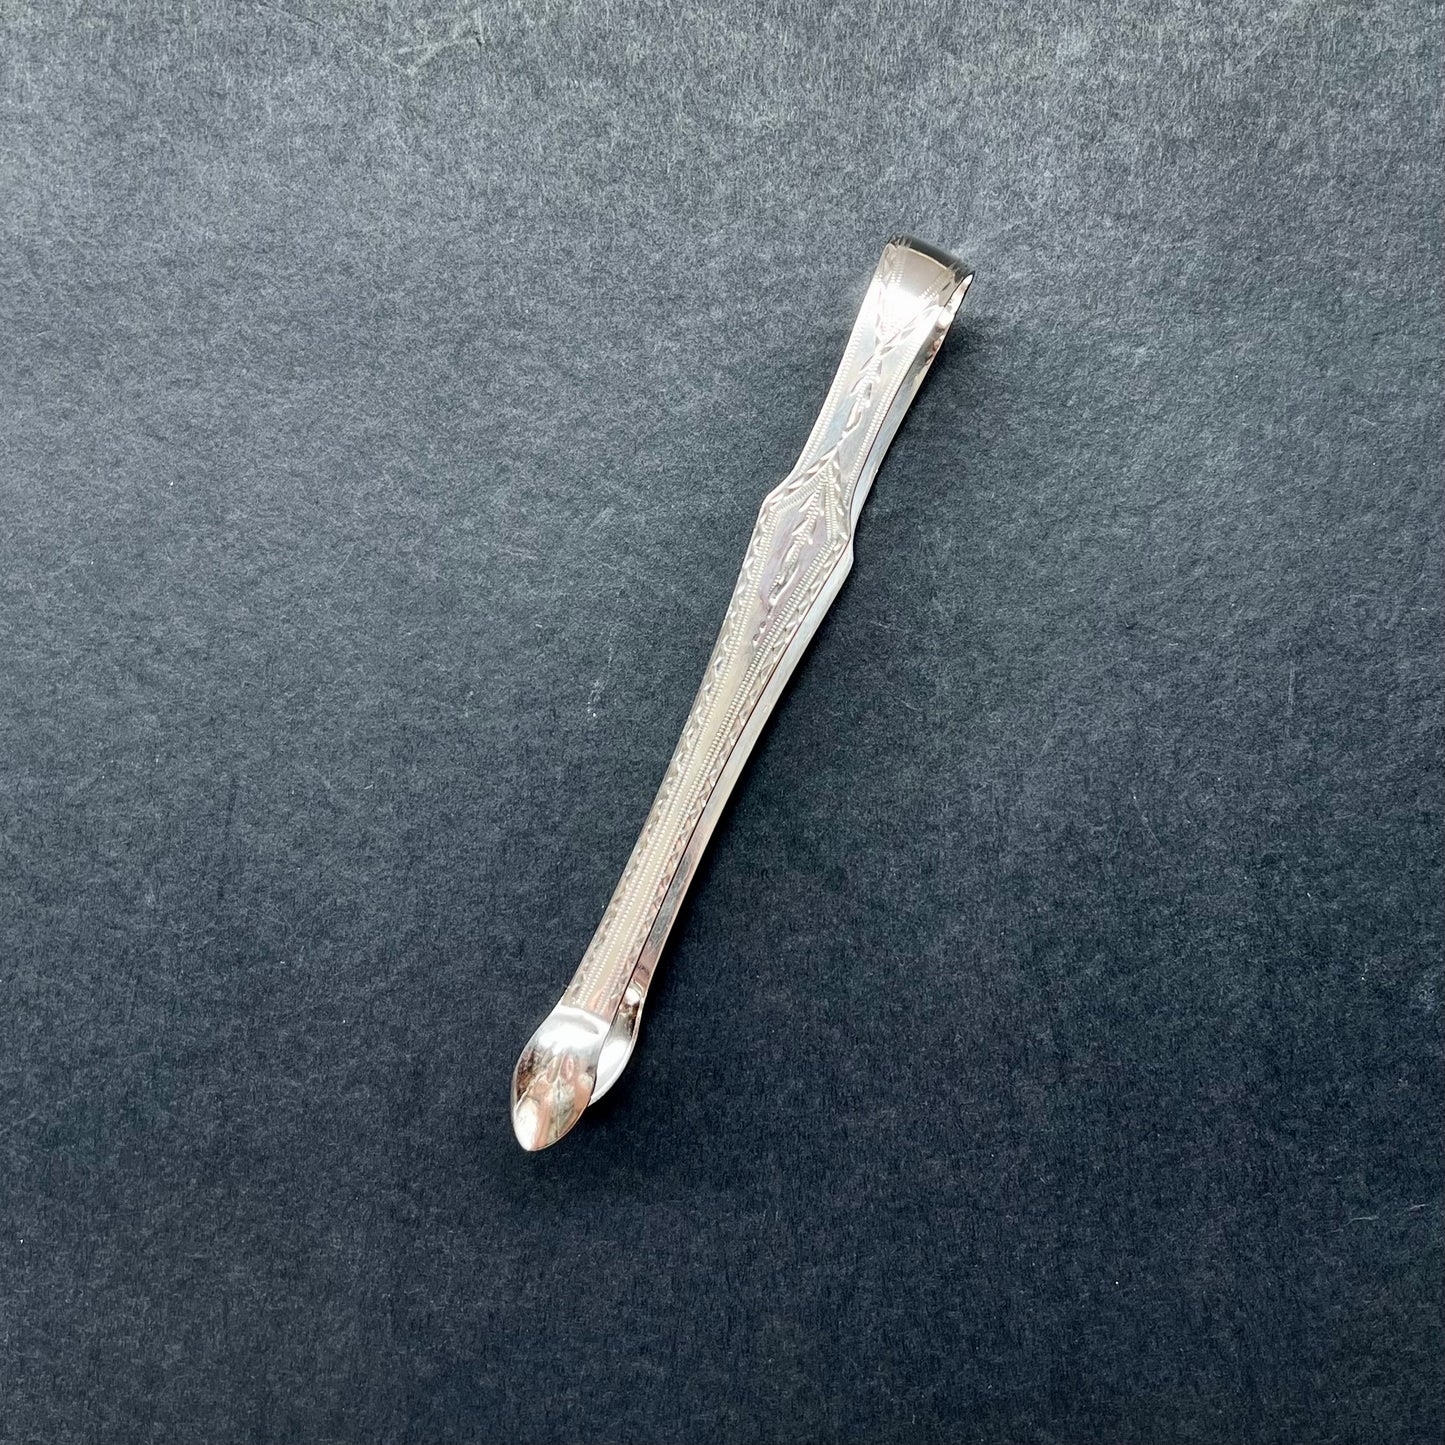 Late Georgian to Regency English provincial sterling silver tongs with thick gauge and crisp hallmarks. John Langlands II, Newcastle, 1796 to 1802